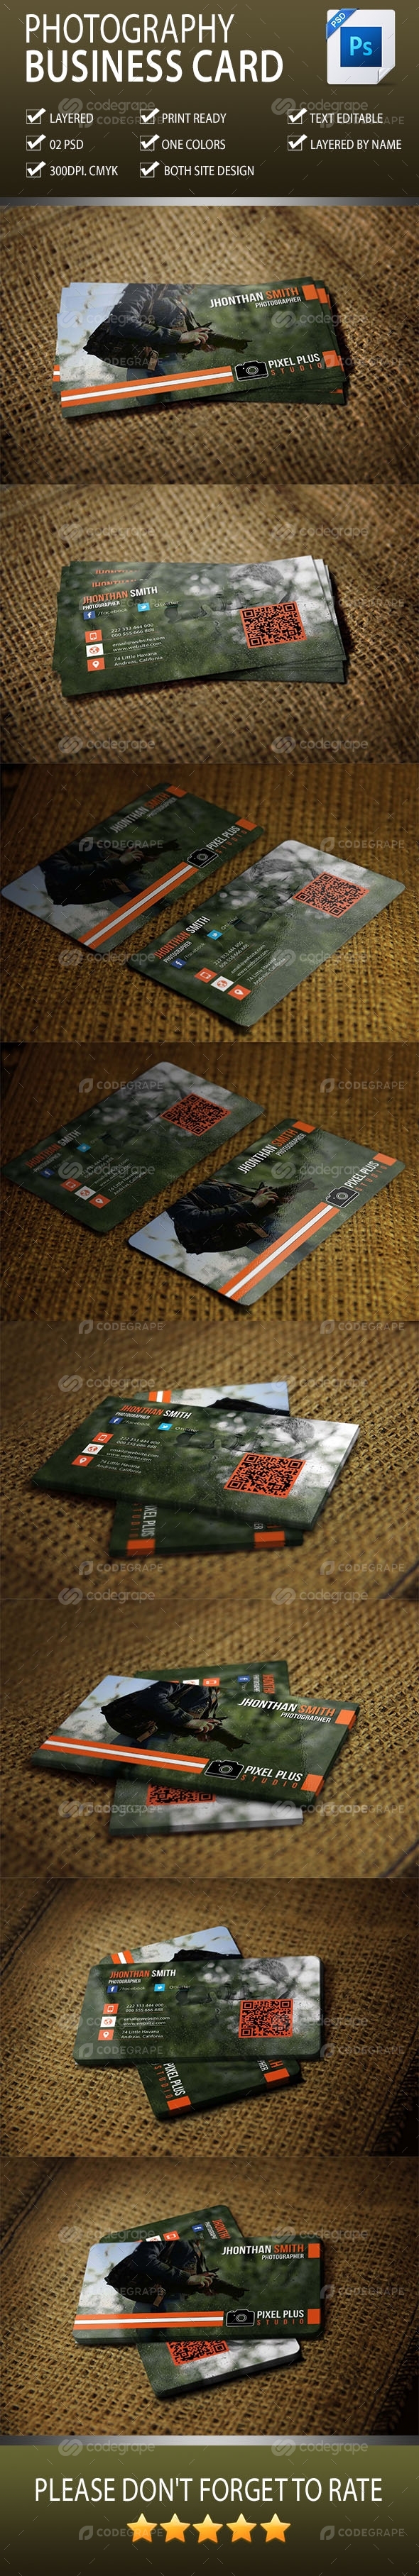 Photography Business Card Vol: 01